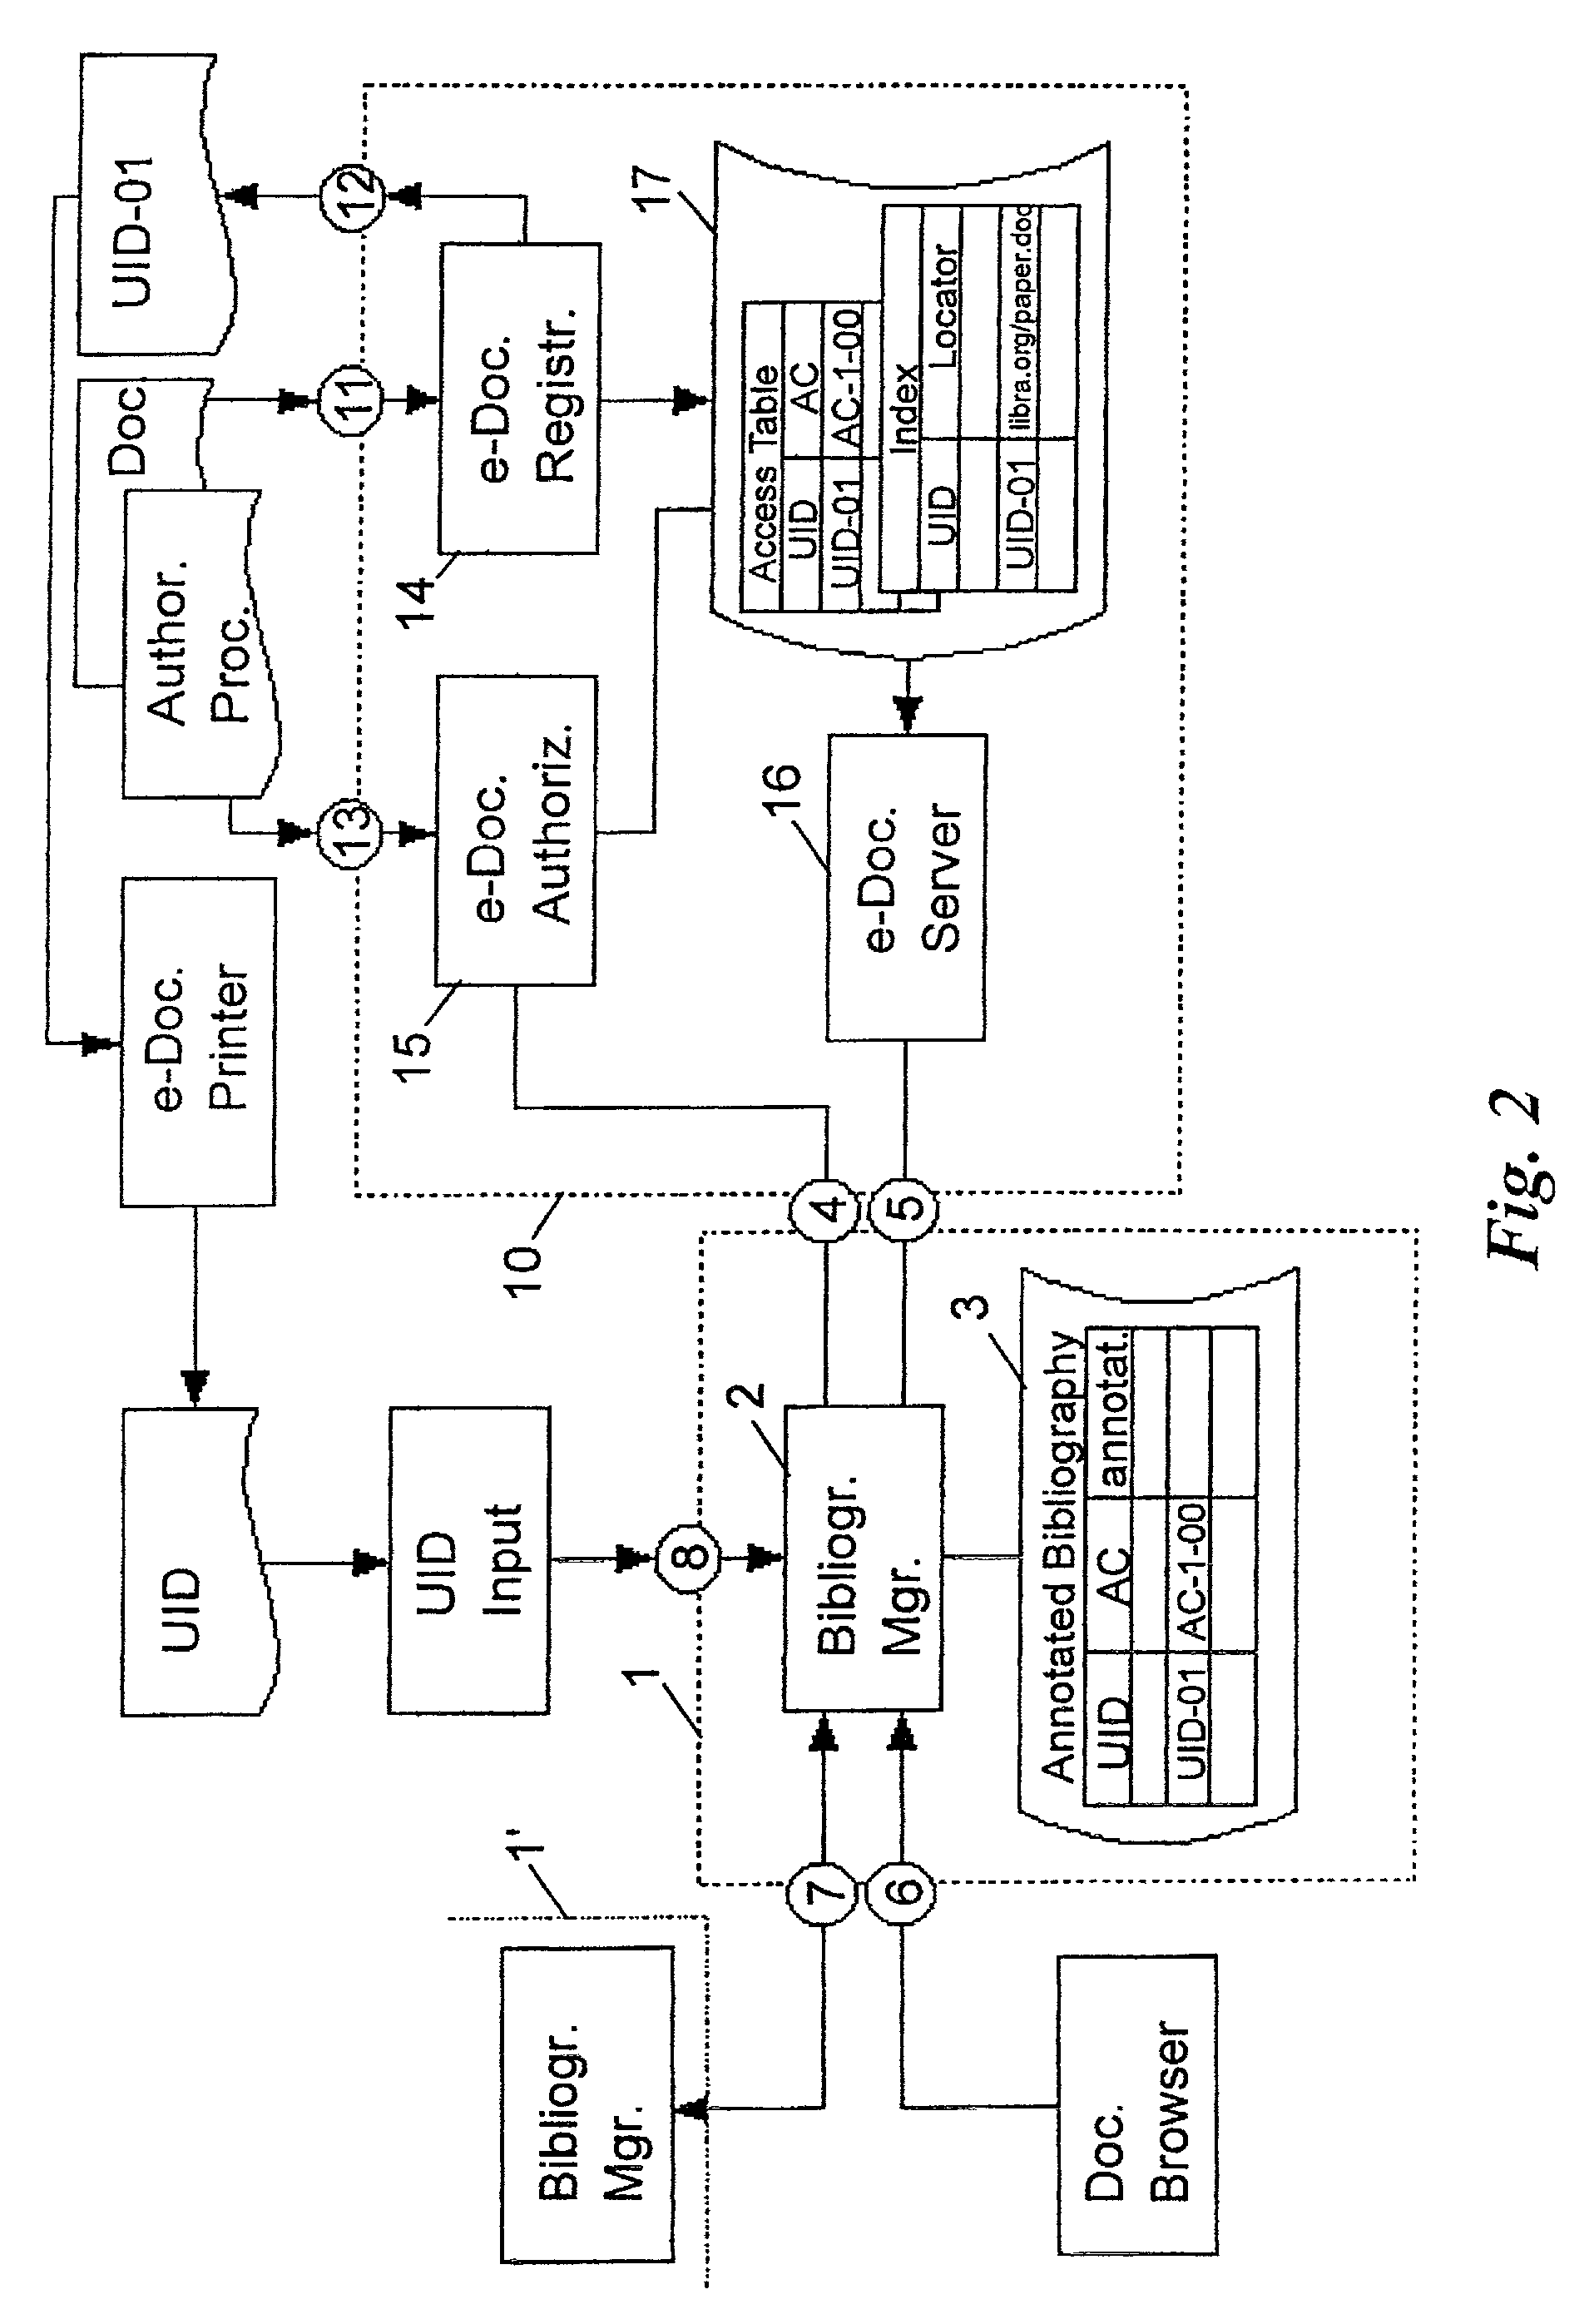 Archiving and retrieval method and apparatus